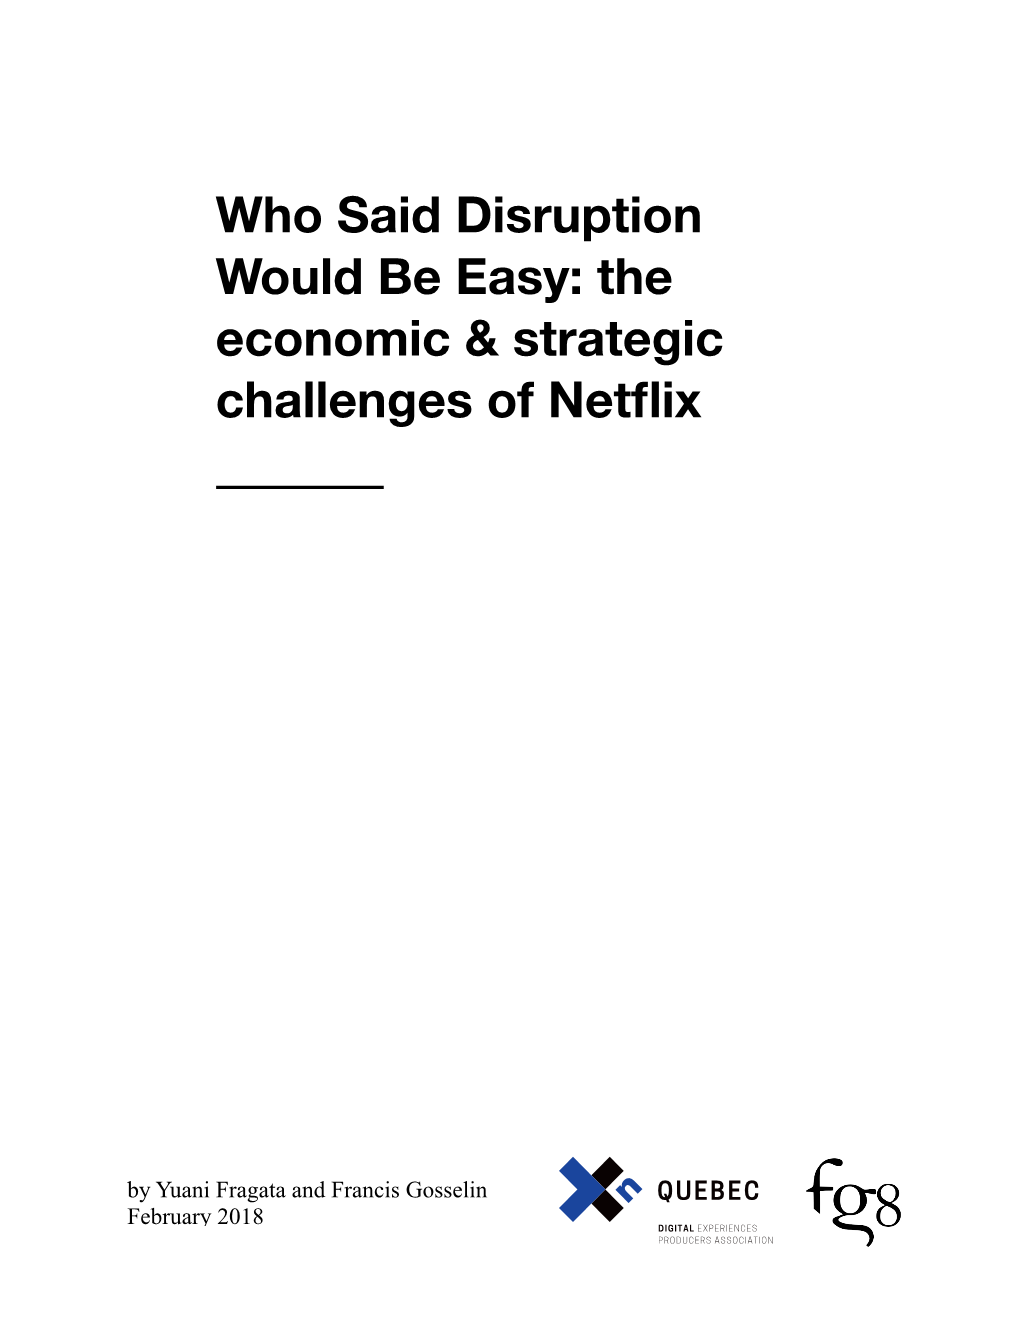 Who Said Disruption Would Be Easy: the Economic & Strategic Challenges of Netflix